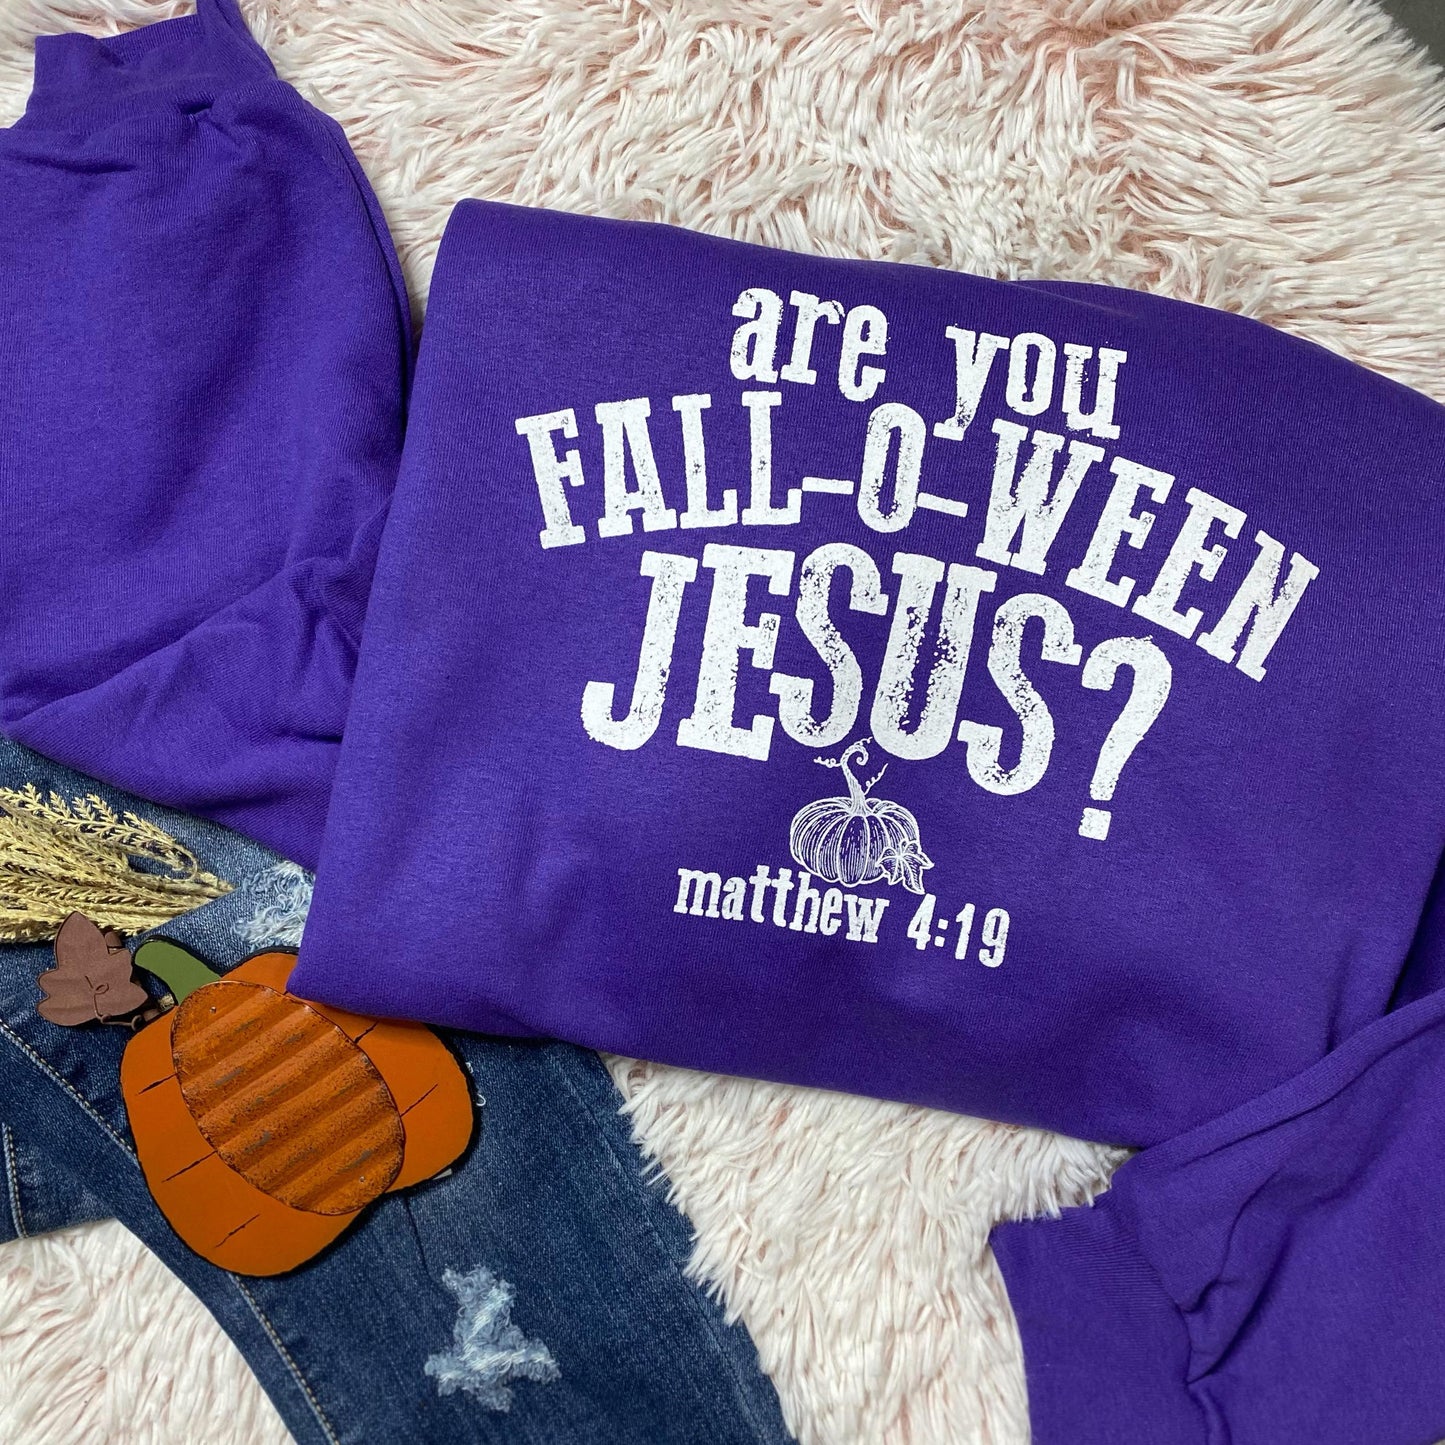 Are you Fall-o-ween Jesus